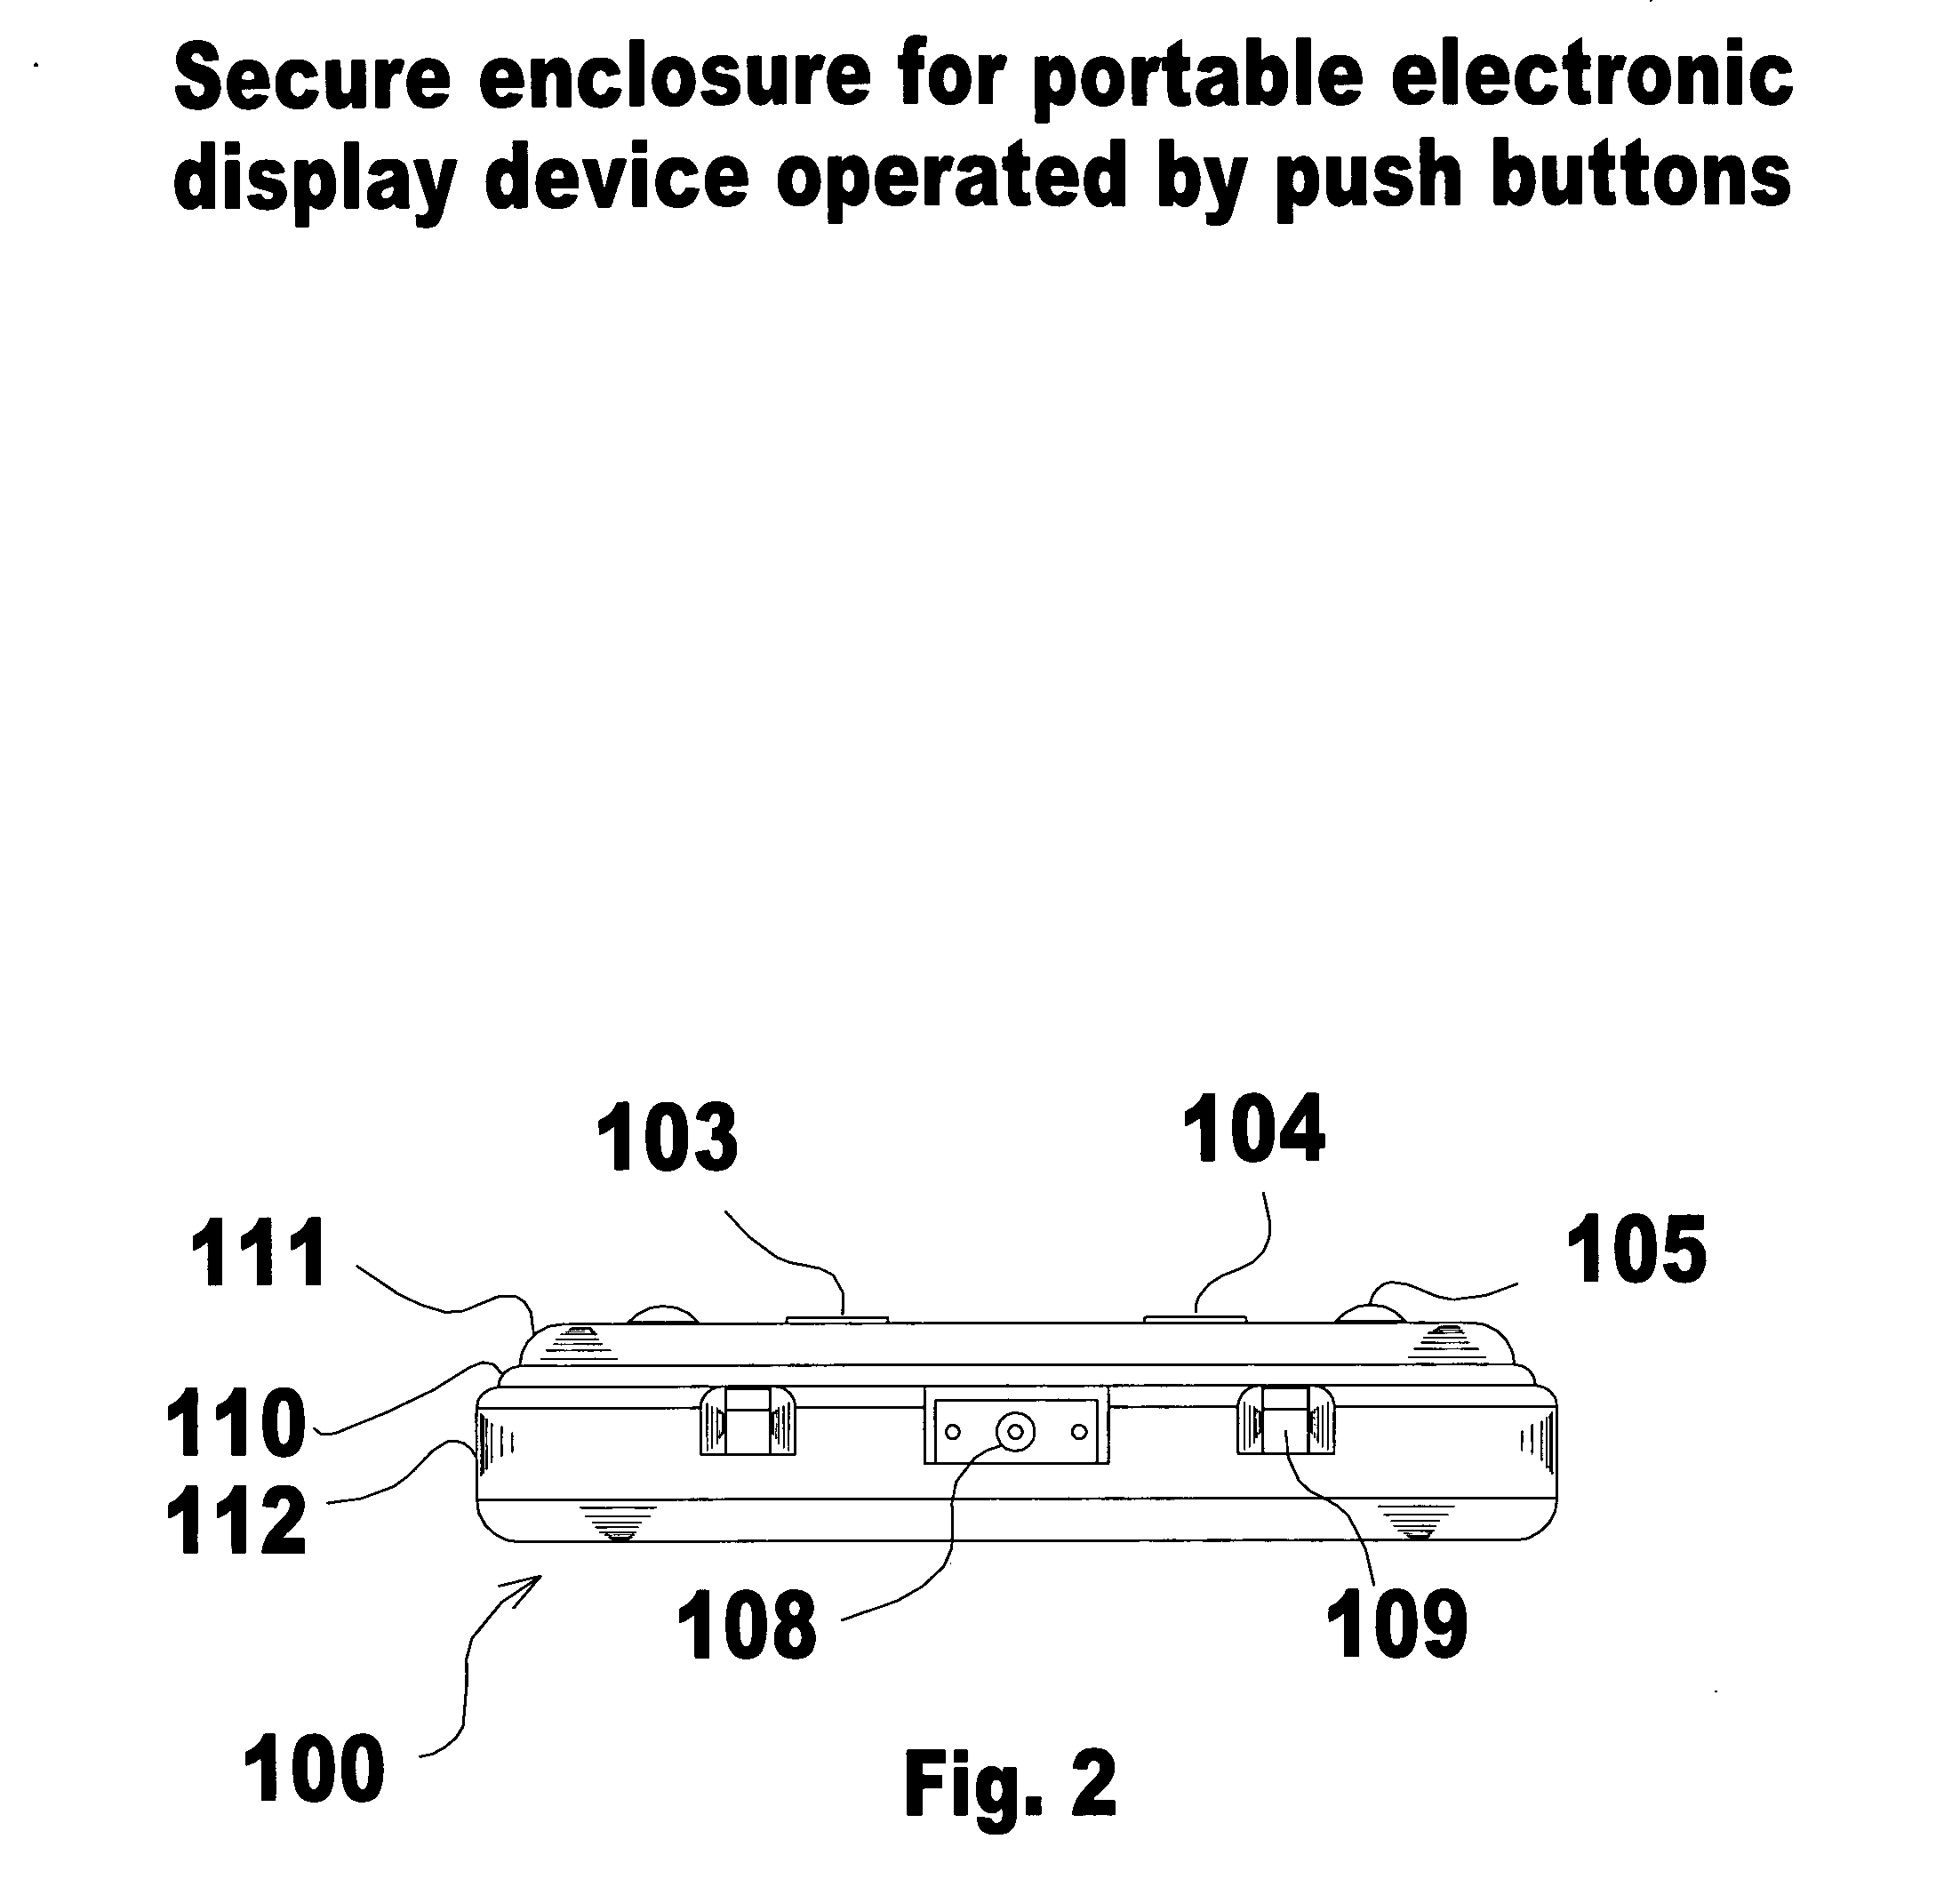 Secure enclosure for portable electronic display device operated by push buttons